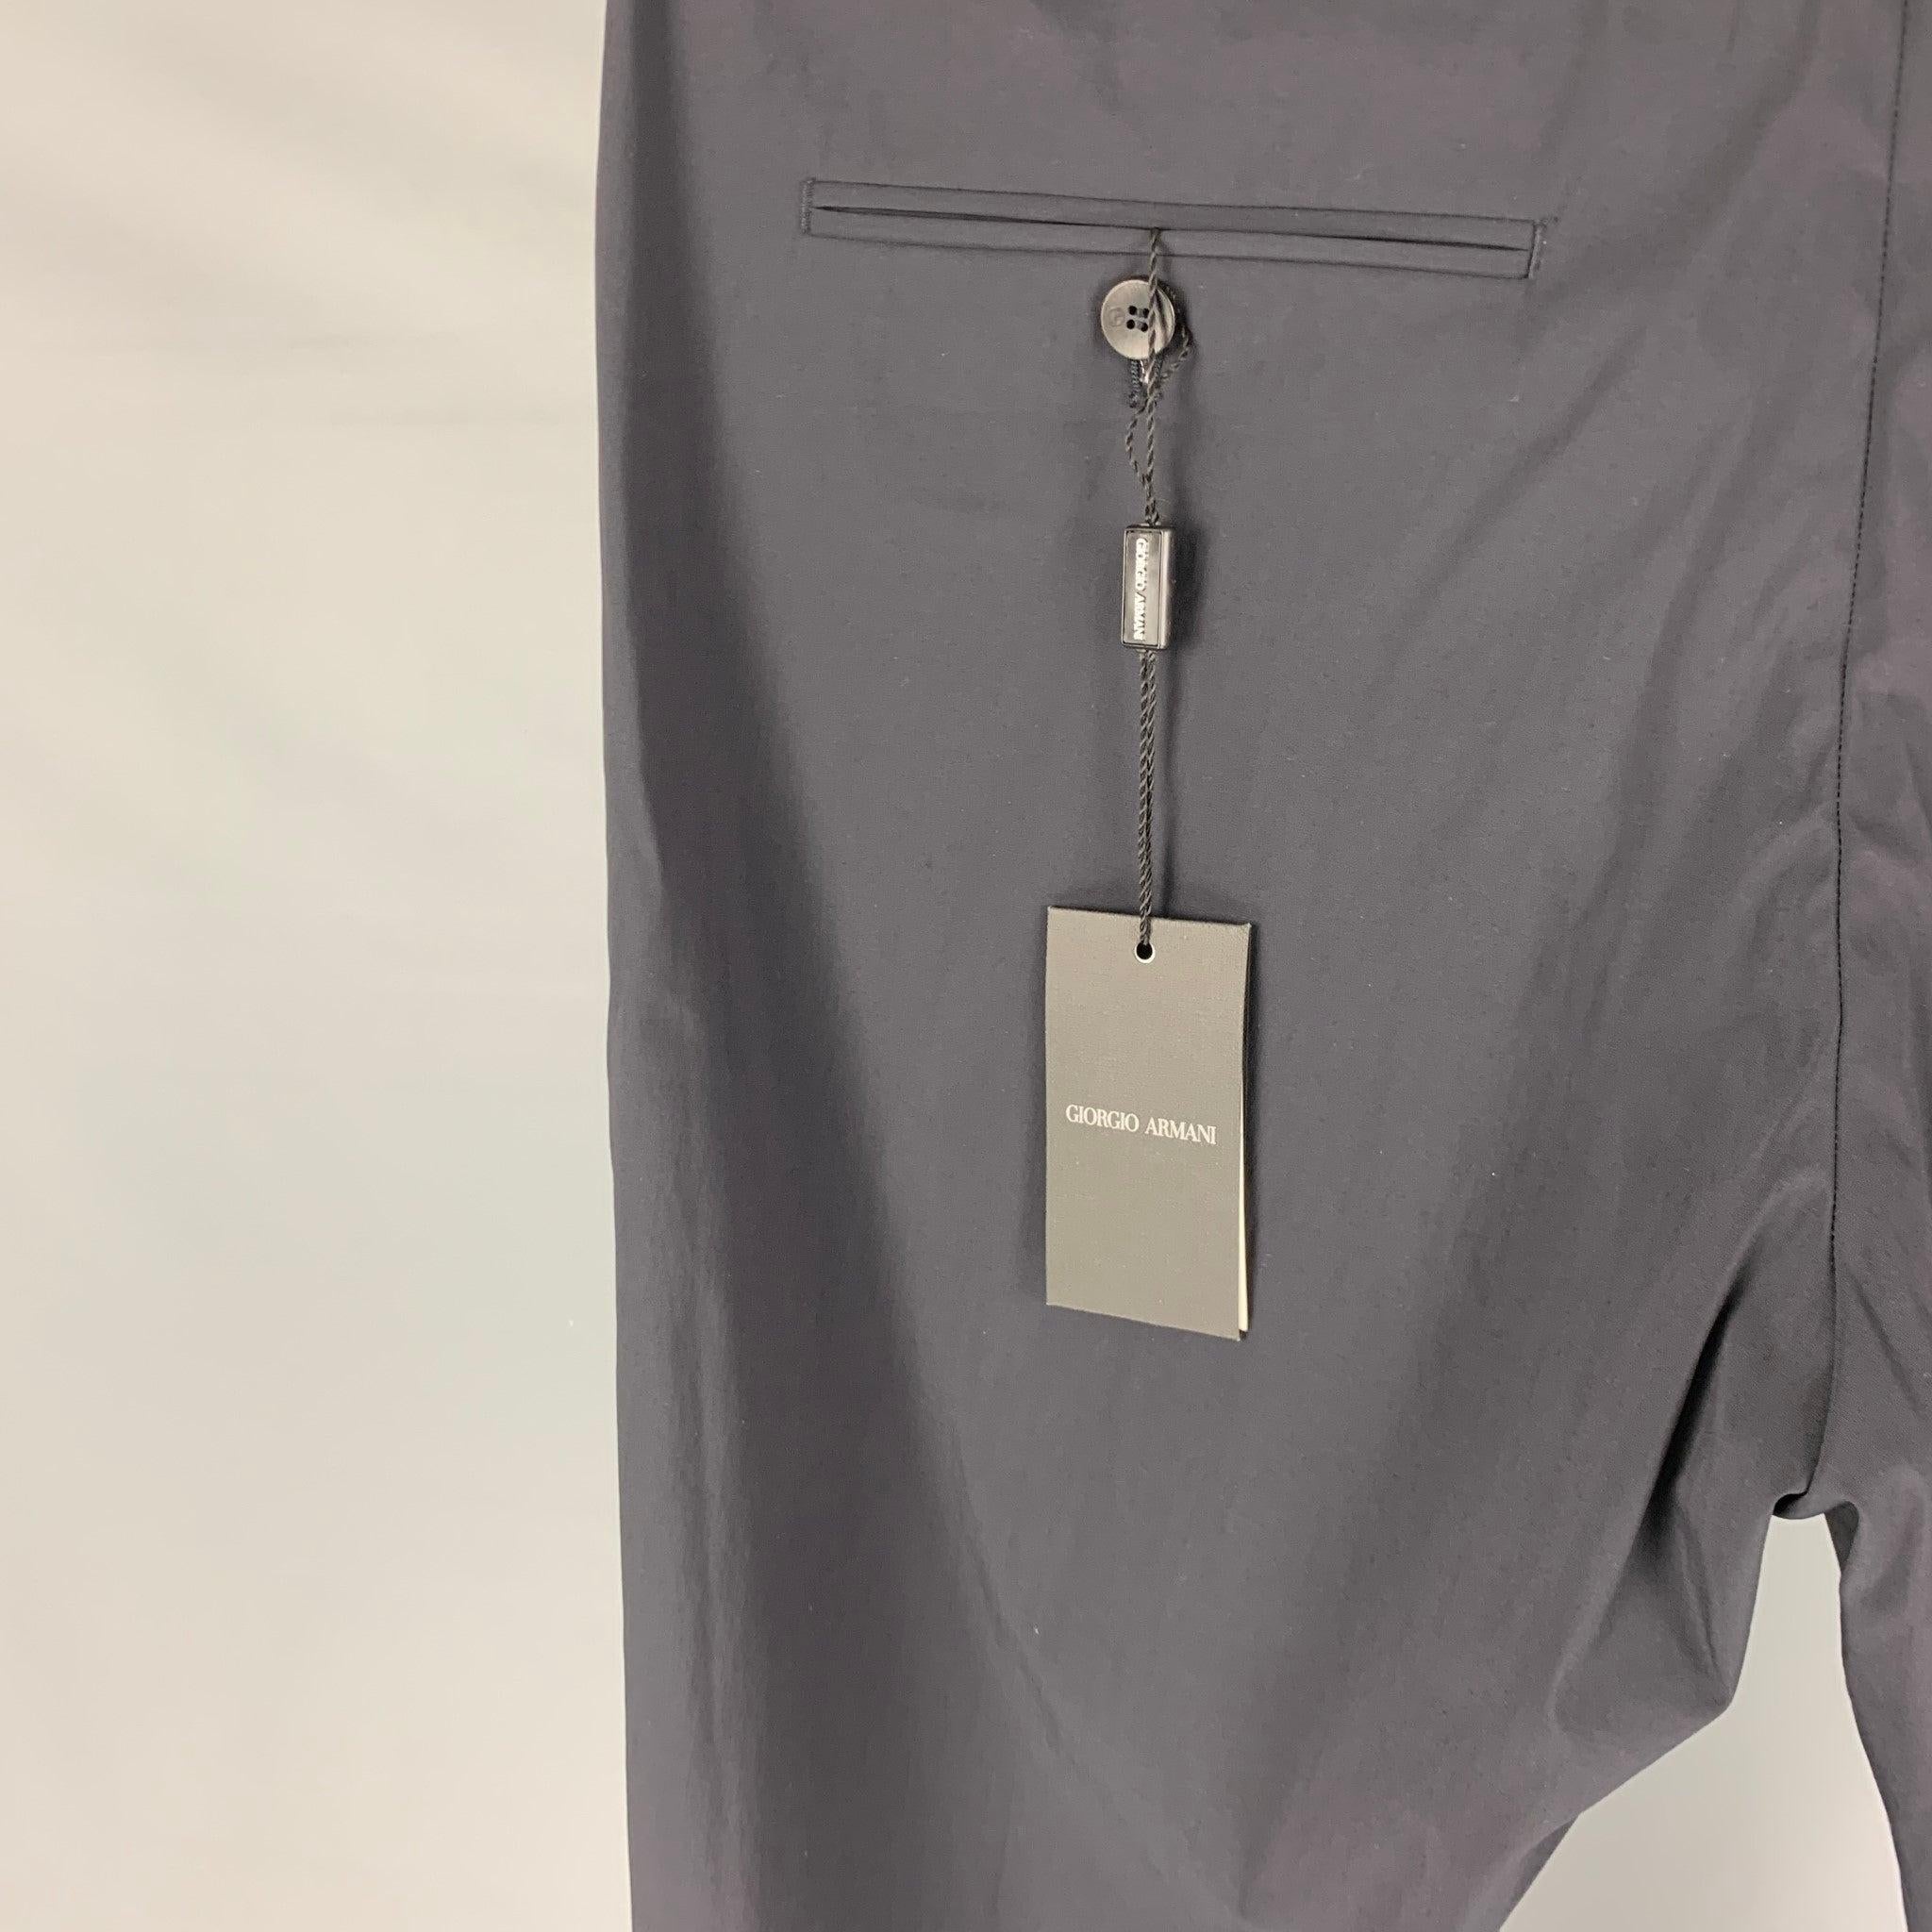 GIORGIO ARMANI Size 34 Navy Wool Blend Elastic Waistband Dress Pants In Good Condition For Sale In San Francisco, CA